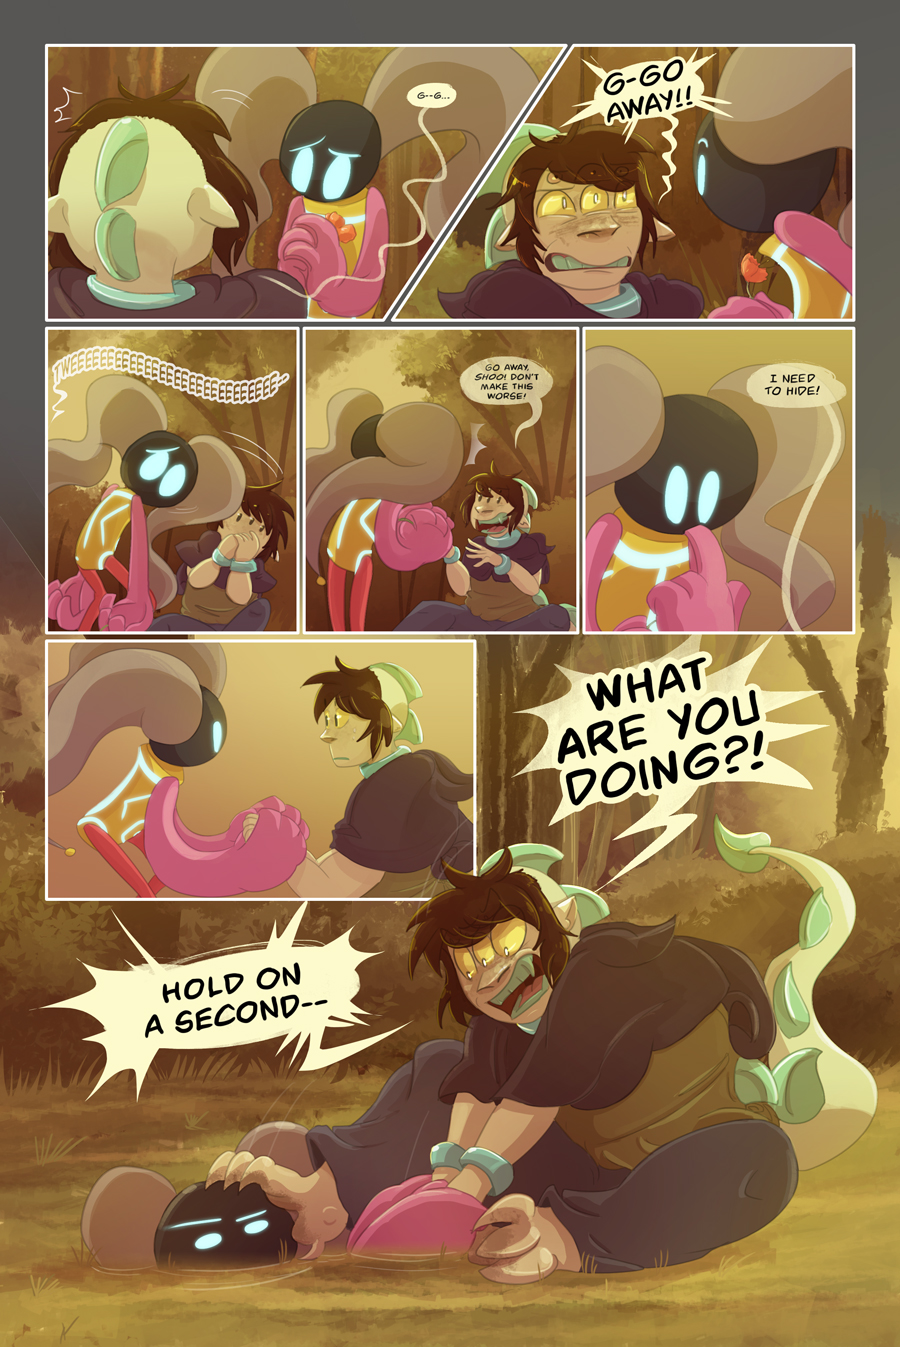 Chapter 5, page 46